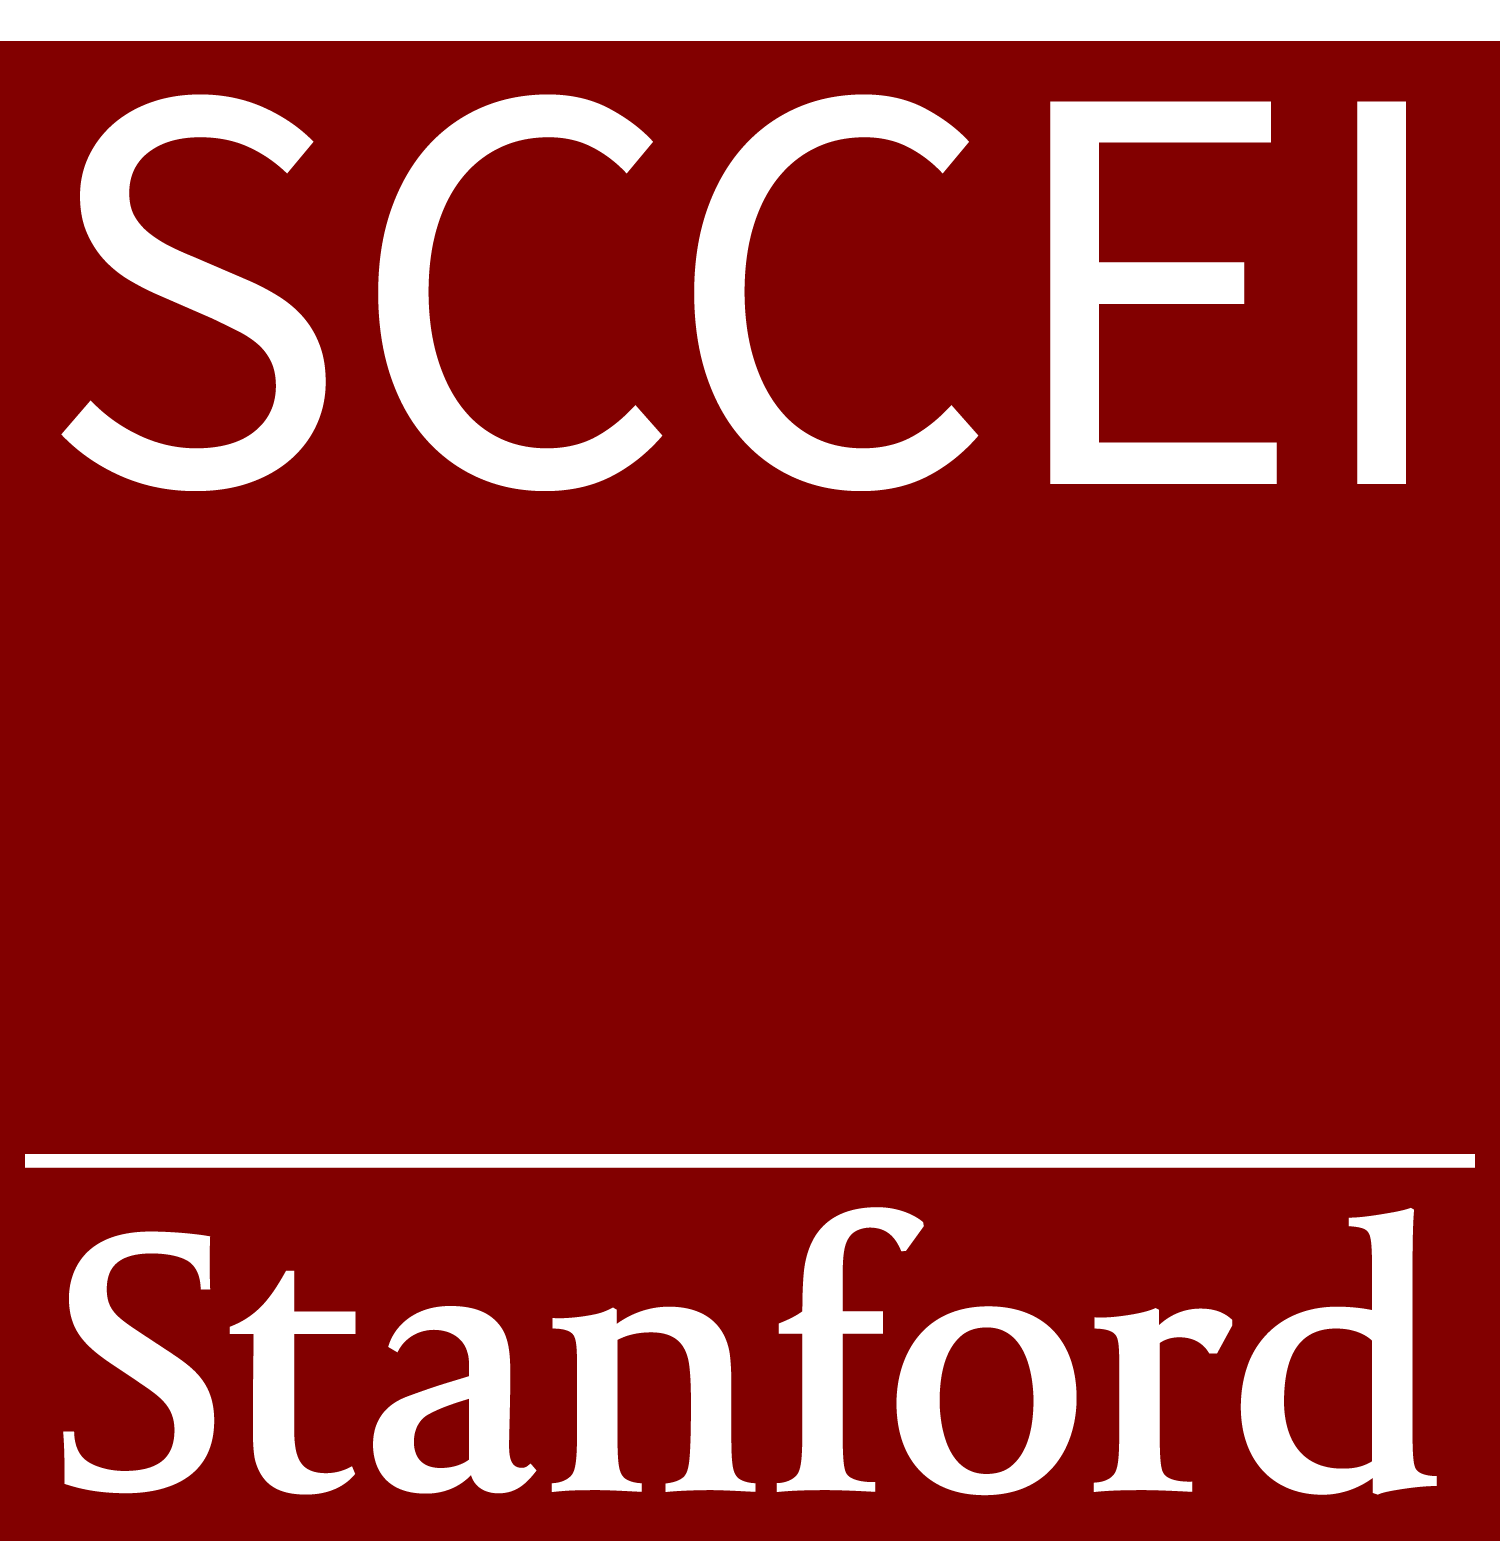 Stanford Center on China's Economy and Institutions